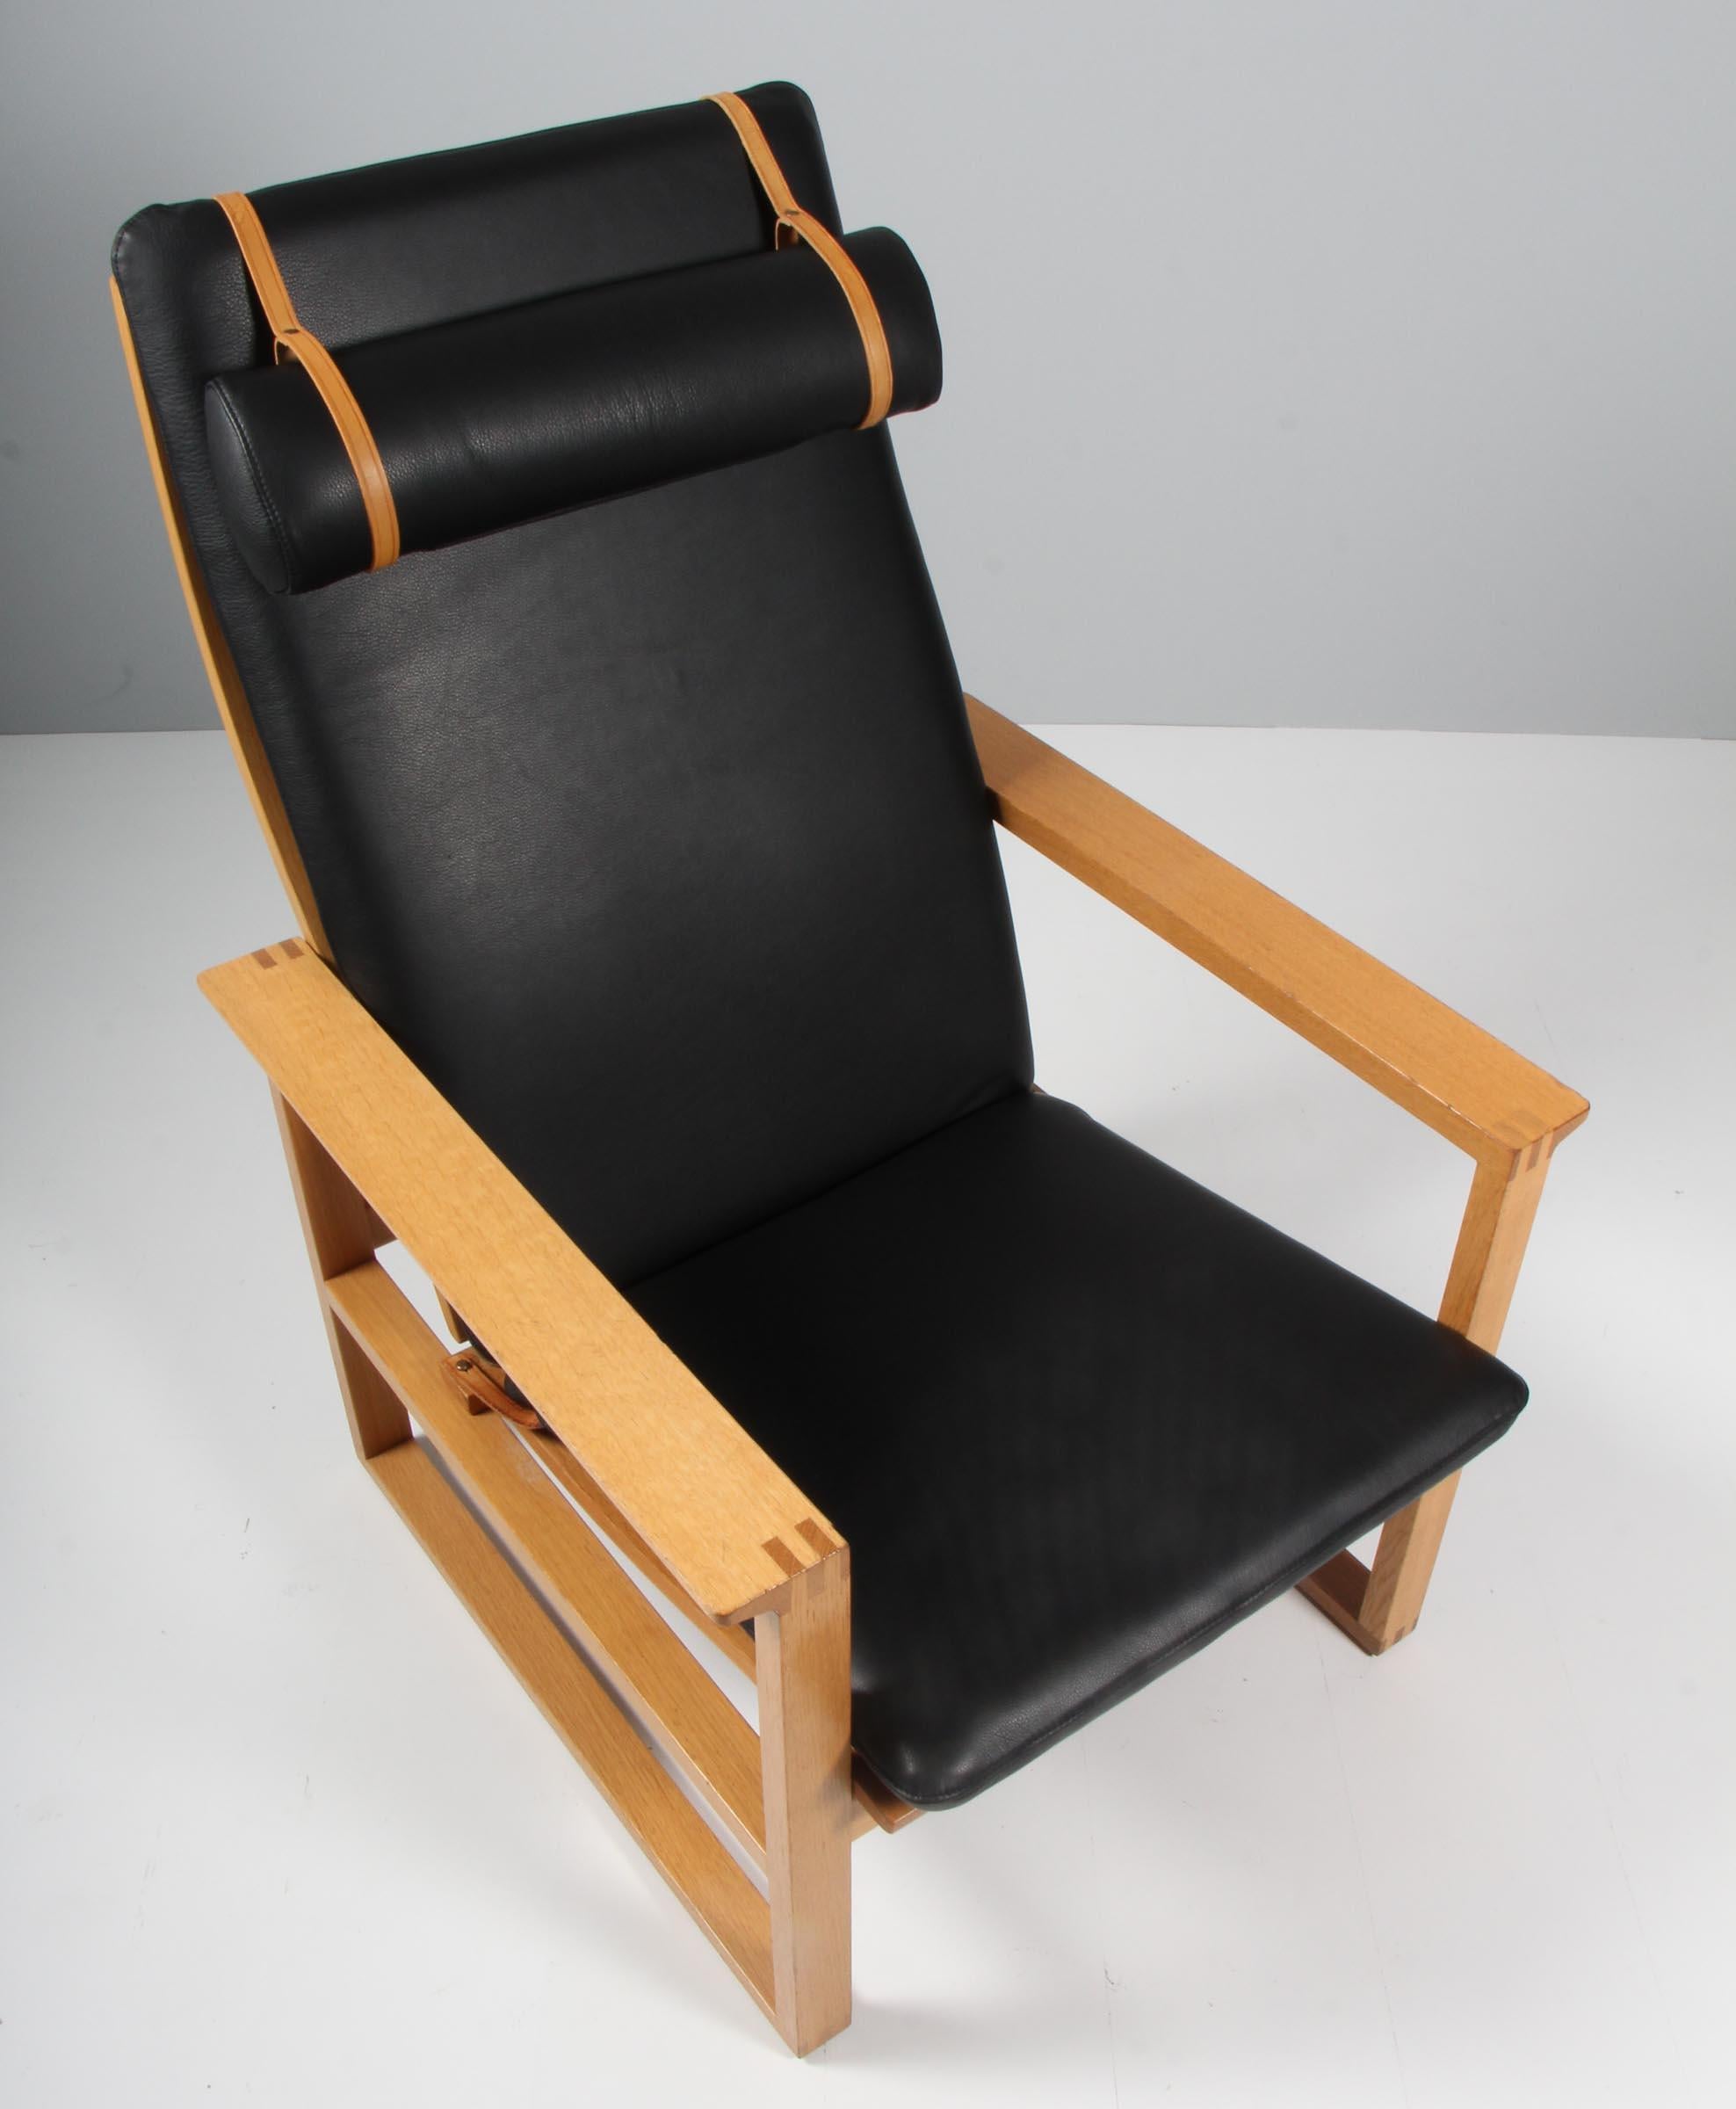 A Børge Mogensen lounge chairs designed in 1956 model number 2254 for Fredericia Stolefabrik. Cubical frames made of solid oak with finger joints.

New upholstered with black aniline leather. The seat cushion can be fixed with a leather strap